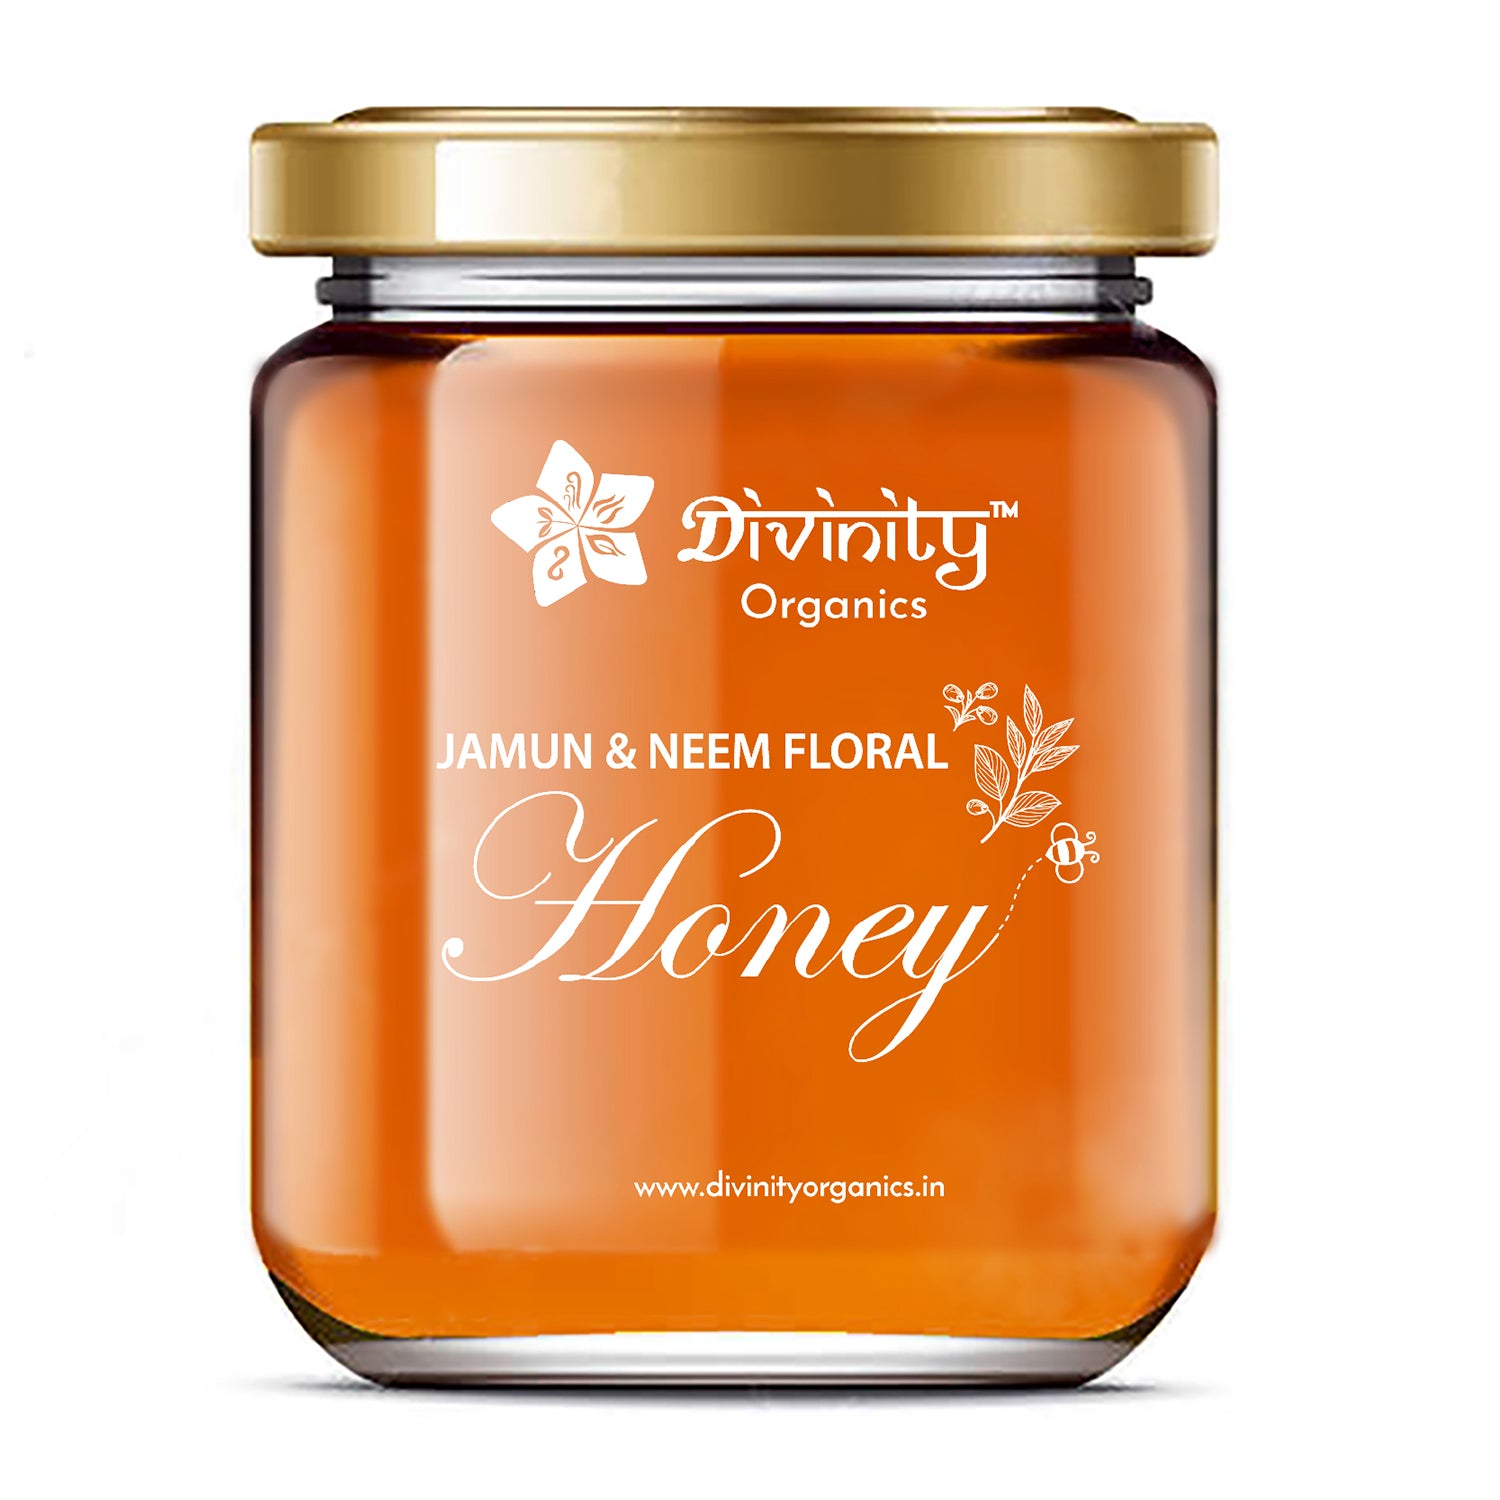 Divinity Organics Jamun & Neem Floral Honey: The jamun neem floral honey is the perfect combination of sweet and bitterness. It is not pungent, though, and keeps your tastebuds confused, wanting more with every bite. Since it is a rich source of iron, this honey is known to purify blood, giving you clear and glowing skin. It also improves your hemoglobin count and is known to help with sore gums and bad breath.